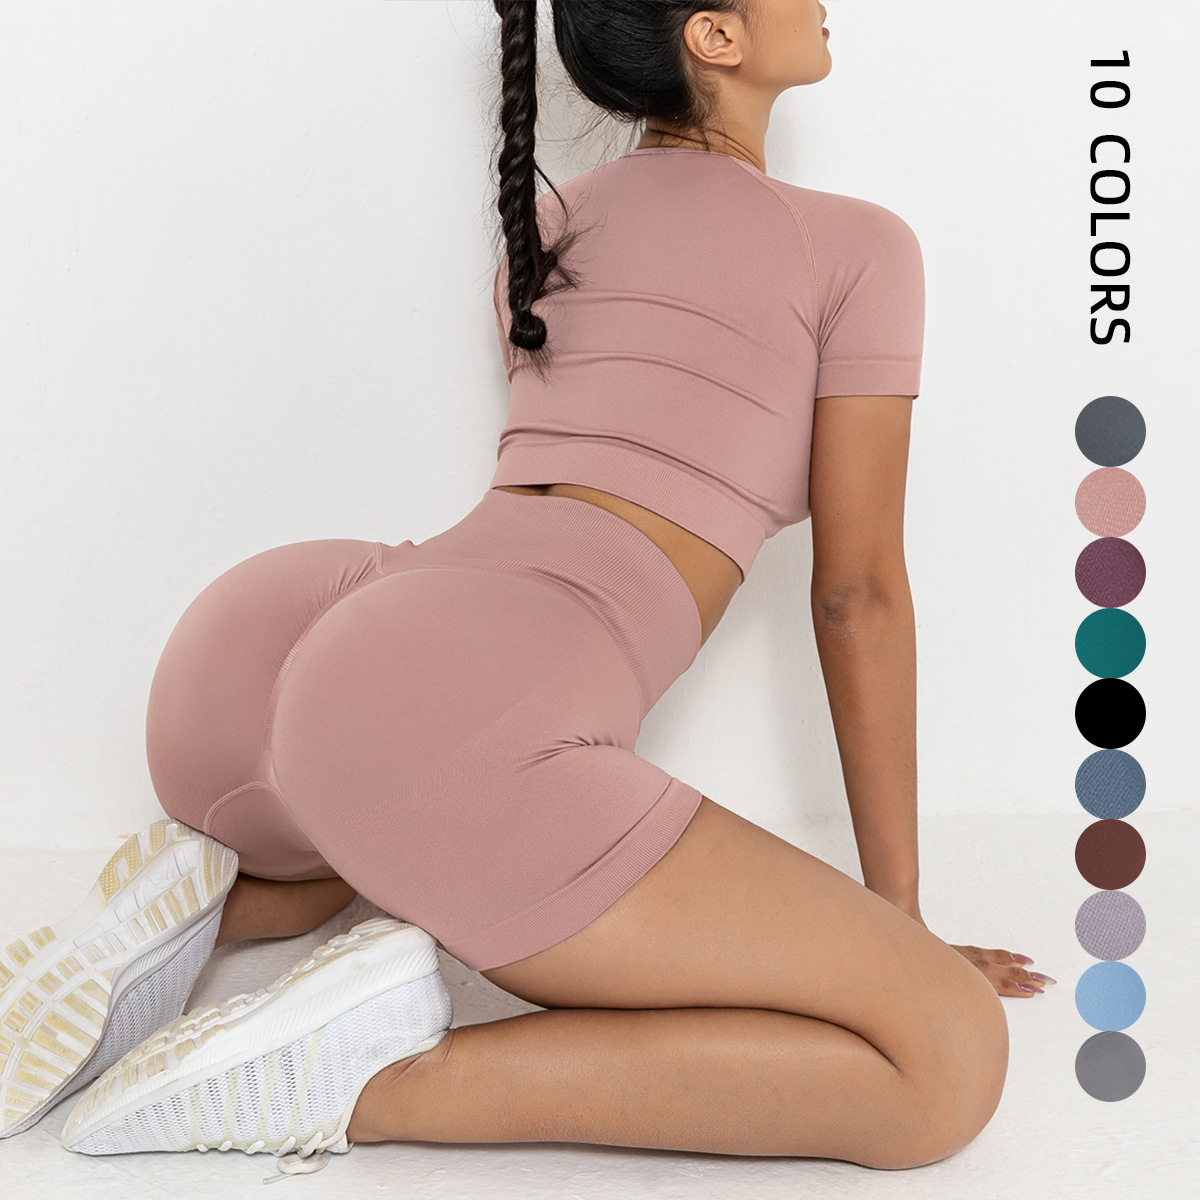 Moisture-Wicking Yoga Pants for the Fashion-Forward Fitness Enthusiast | ZHIHUI Featured Image